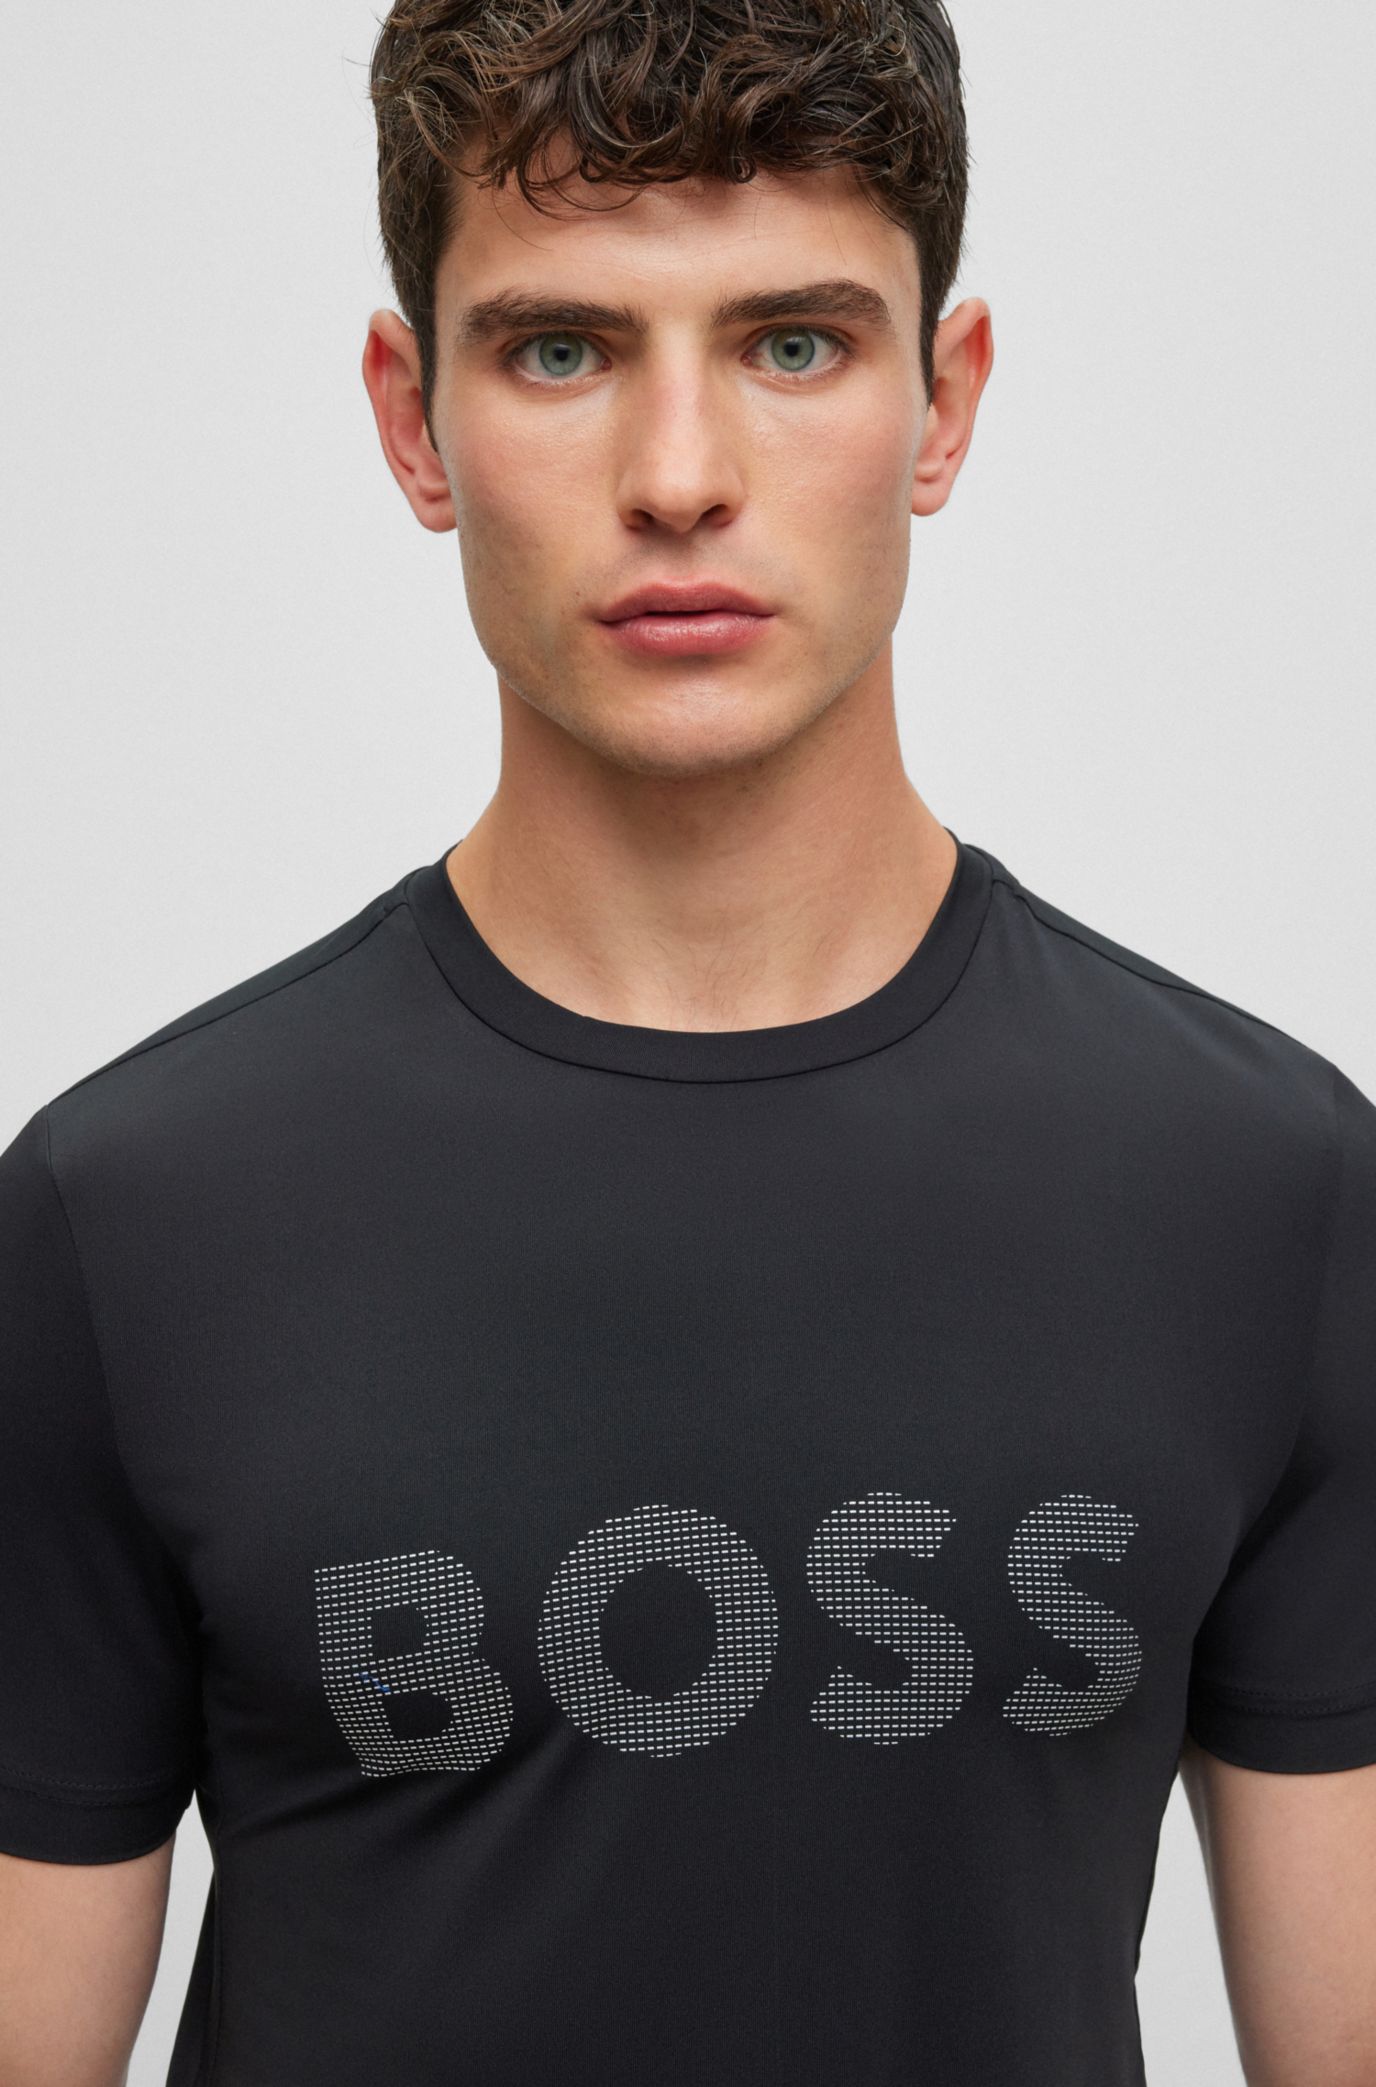 BOSS - T-shirt Slim-fit logo with reflective decorative